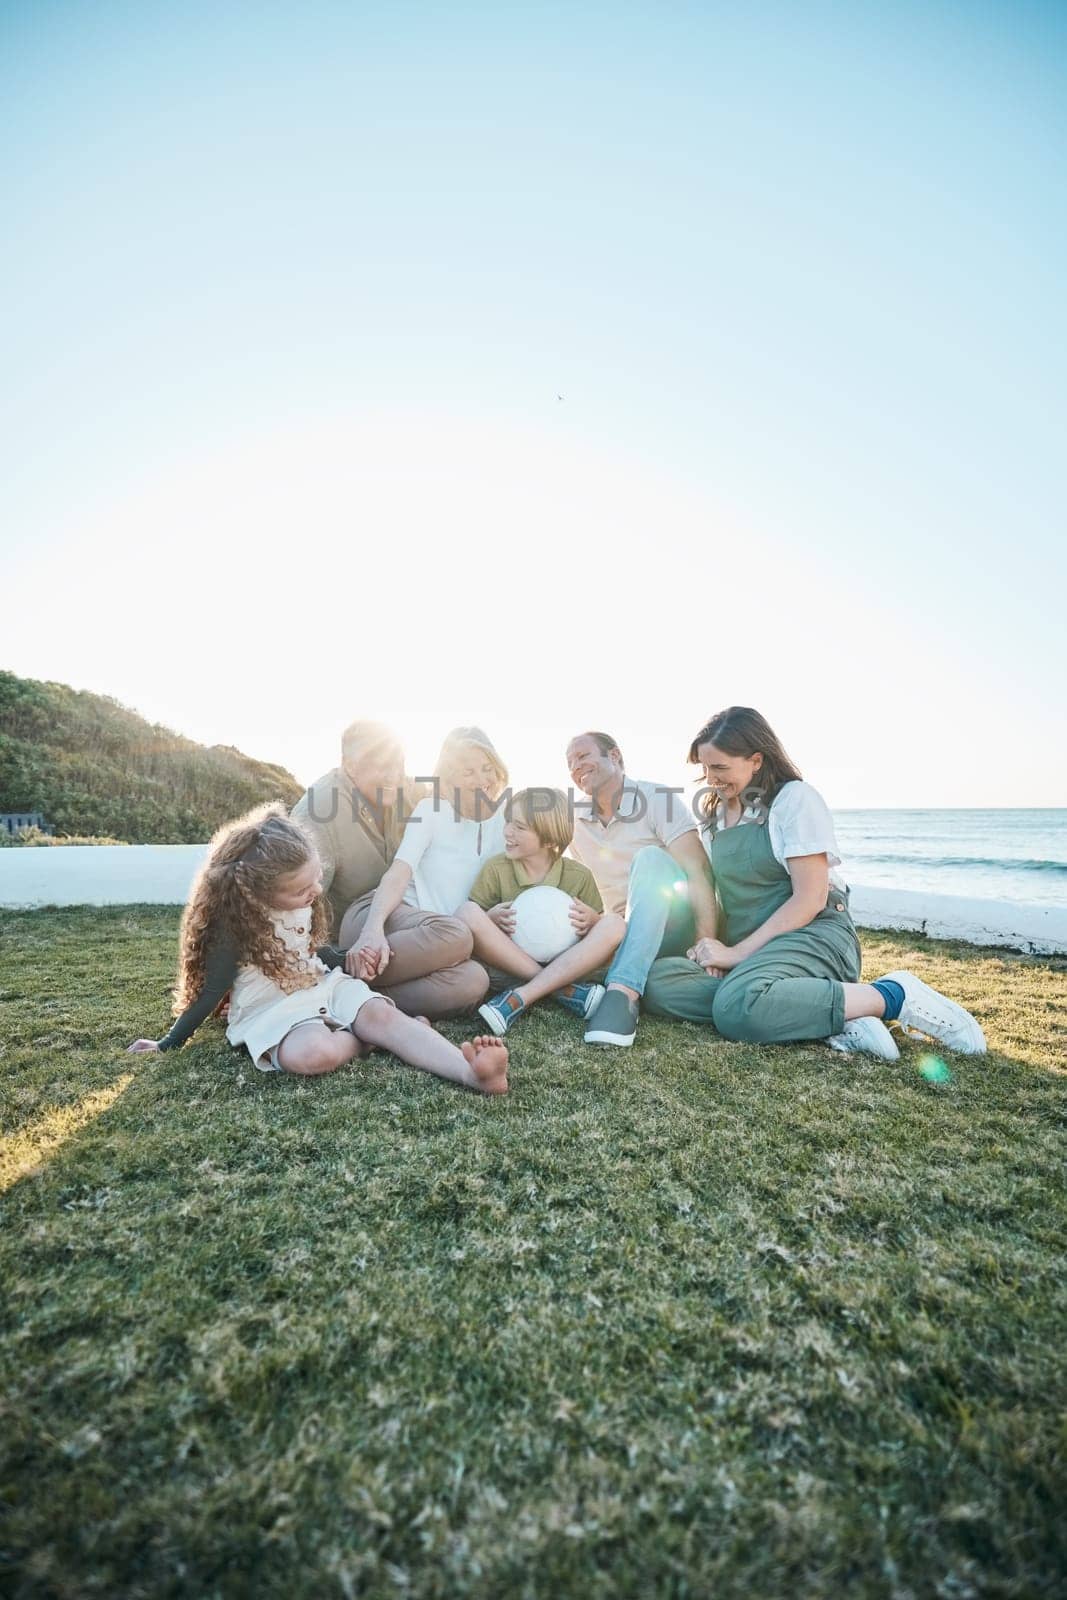 Family, grandparents and kids on grass by ocean for bonding, relationship and relax together. Nature, parents and happy grandmother, grandfather and children on holiday, vacation and travel by sea.